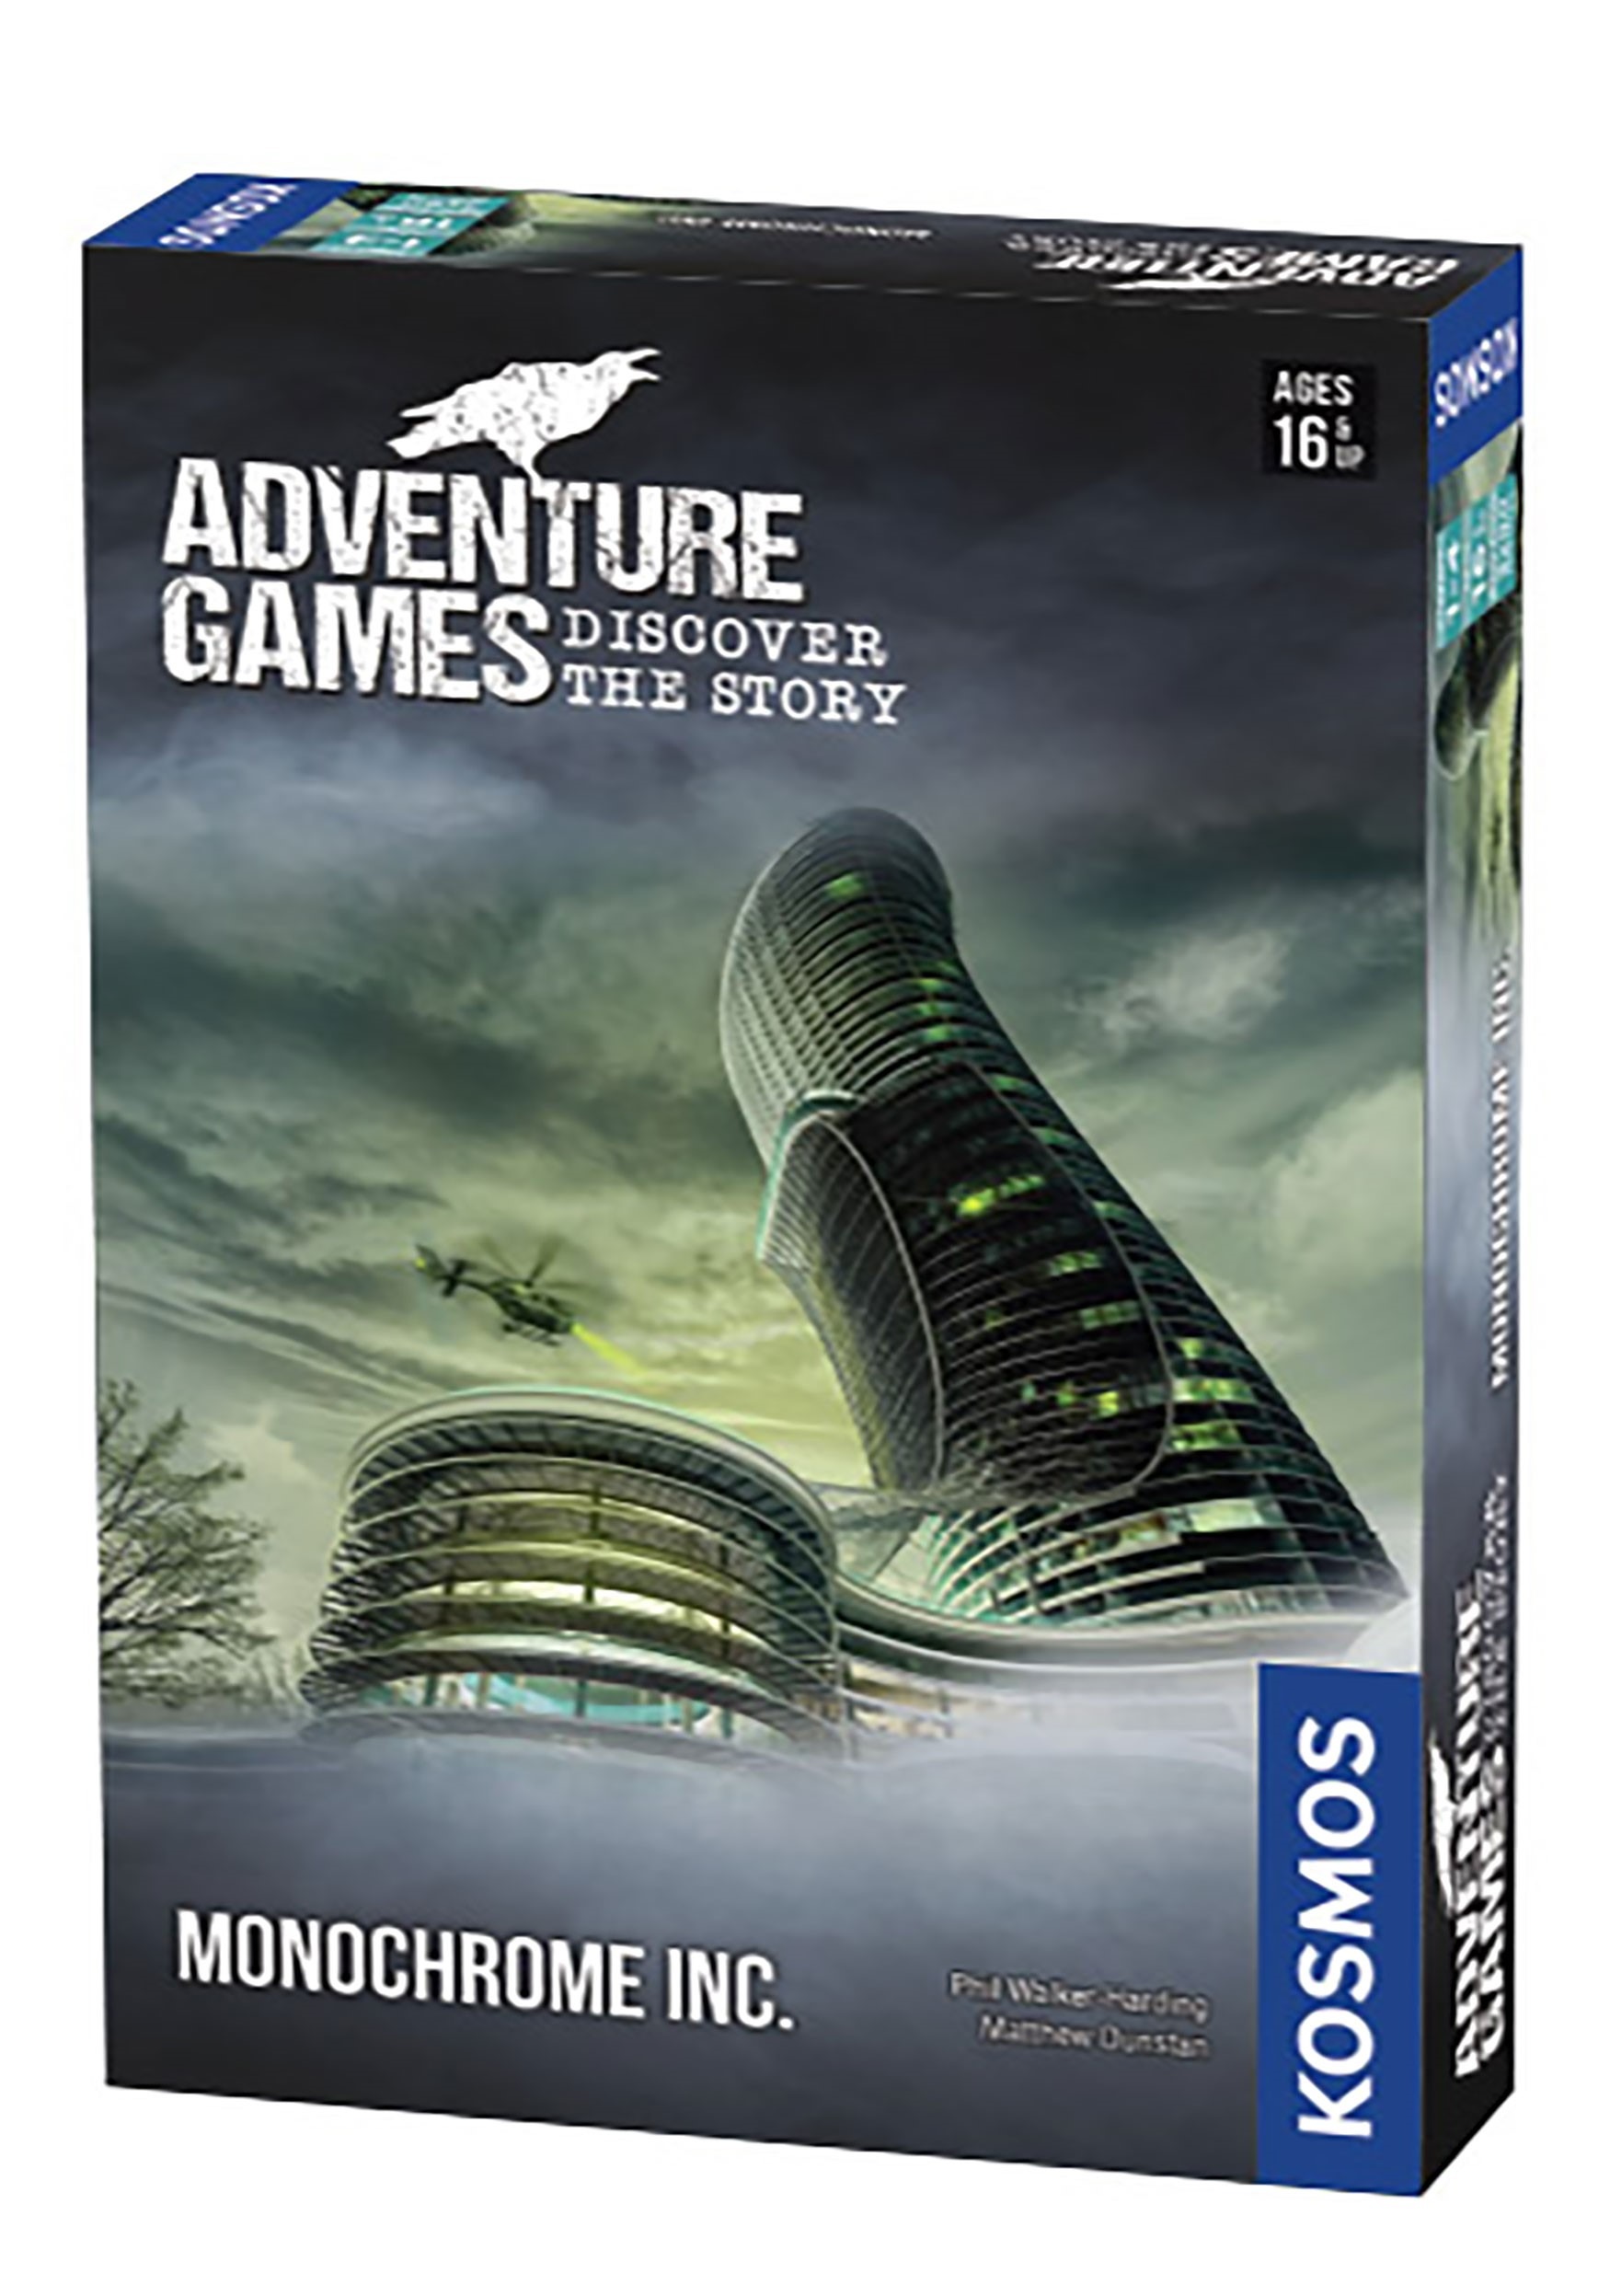 Adventure Games Discover the Story: Monochrome Inc.